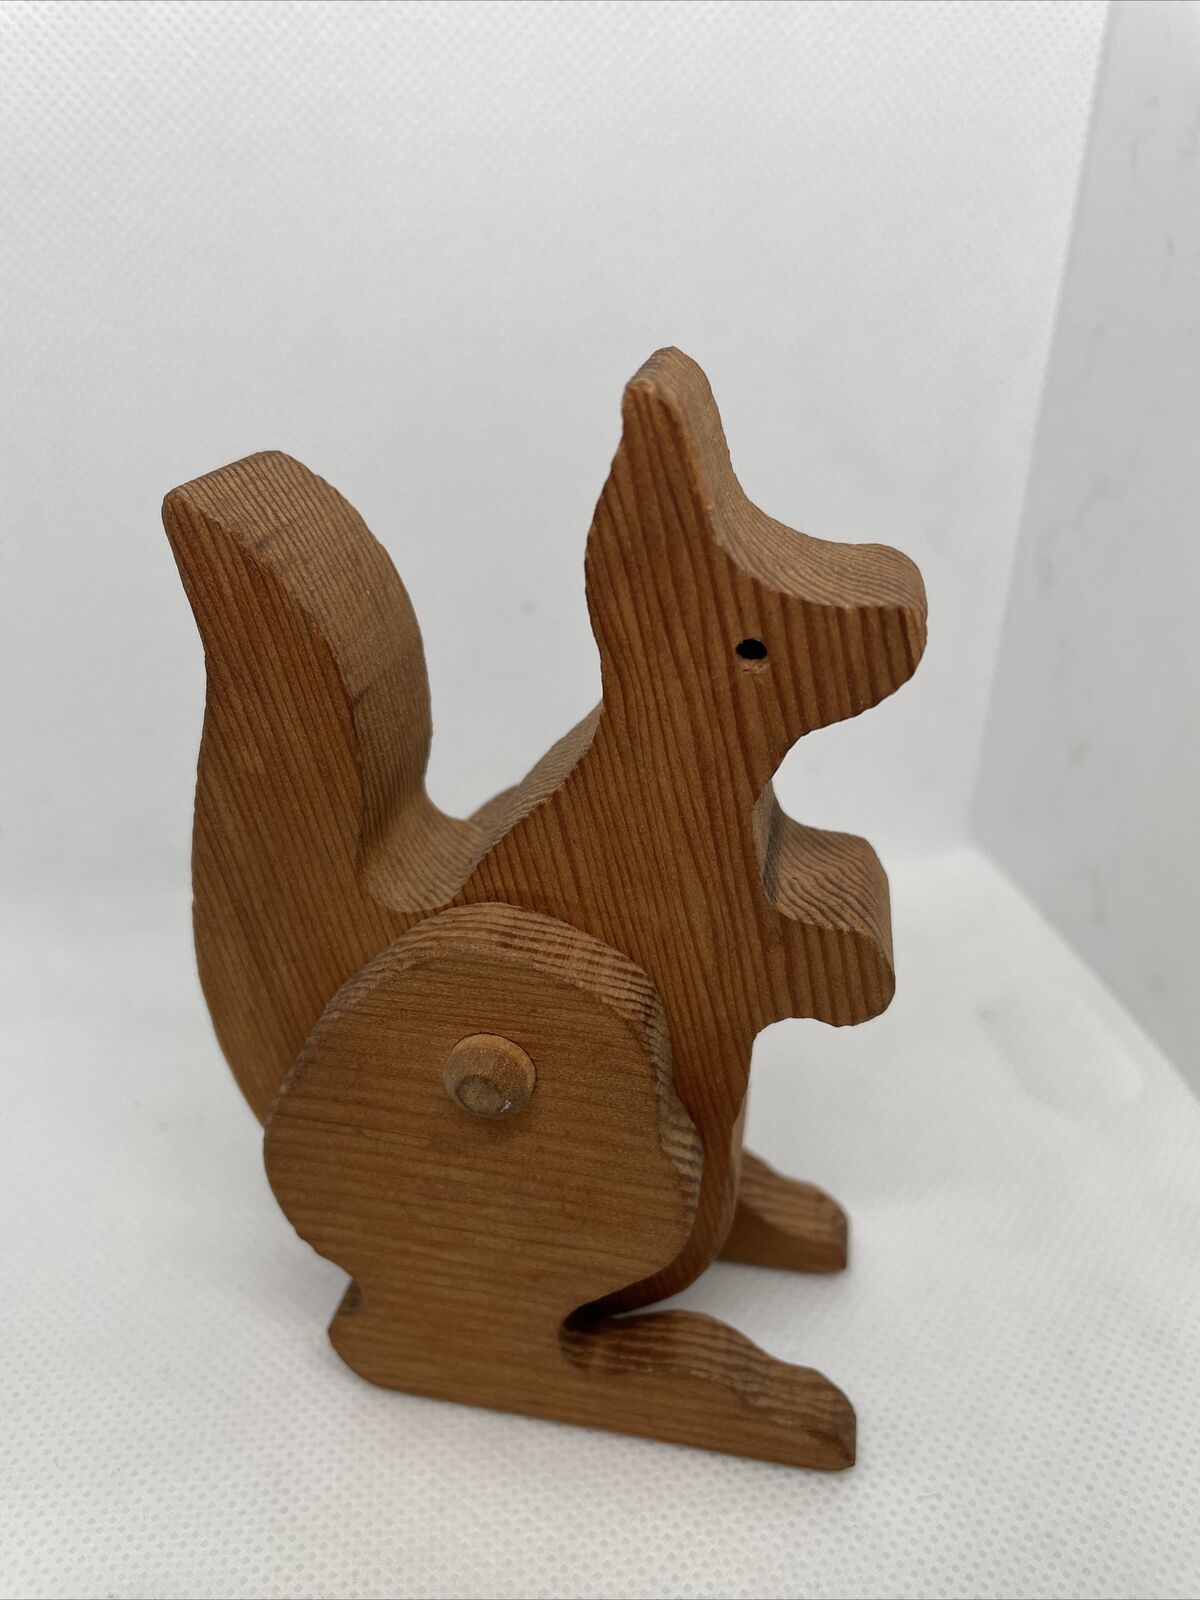 Vintage Hand Made Wooden Wood Kangaroo Toy Figurine Movable Legs Fast Ship 🦘🔥